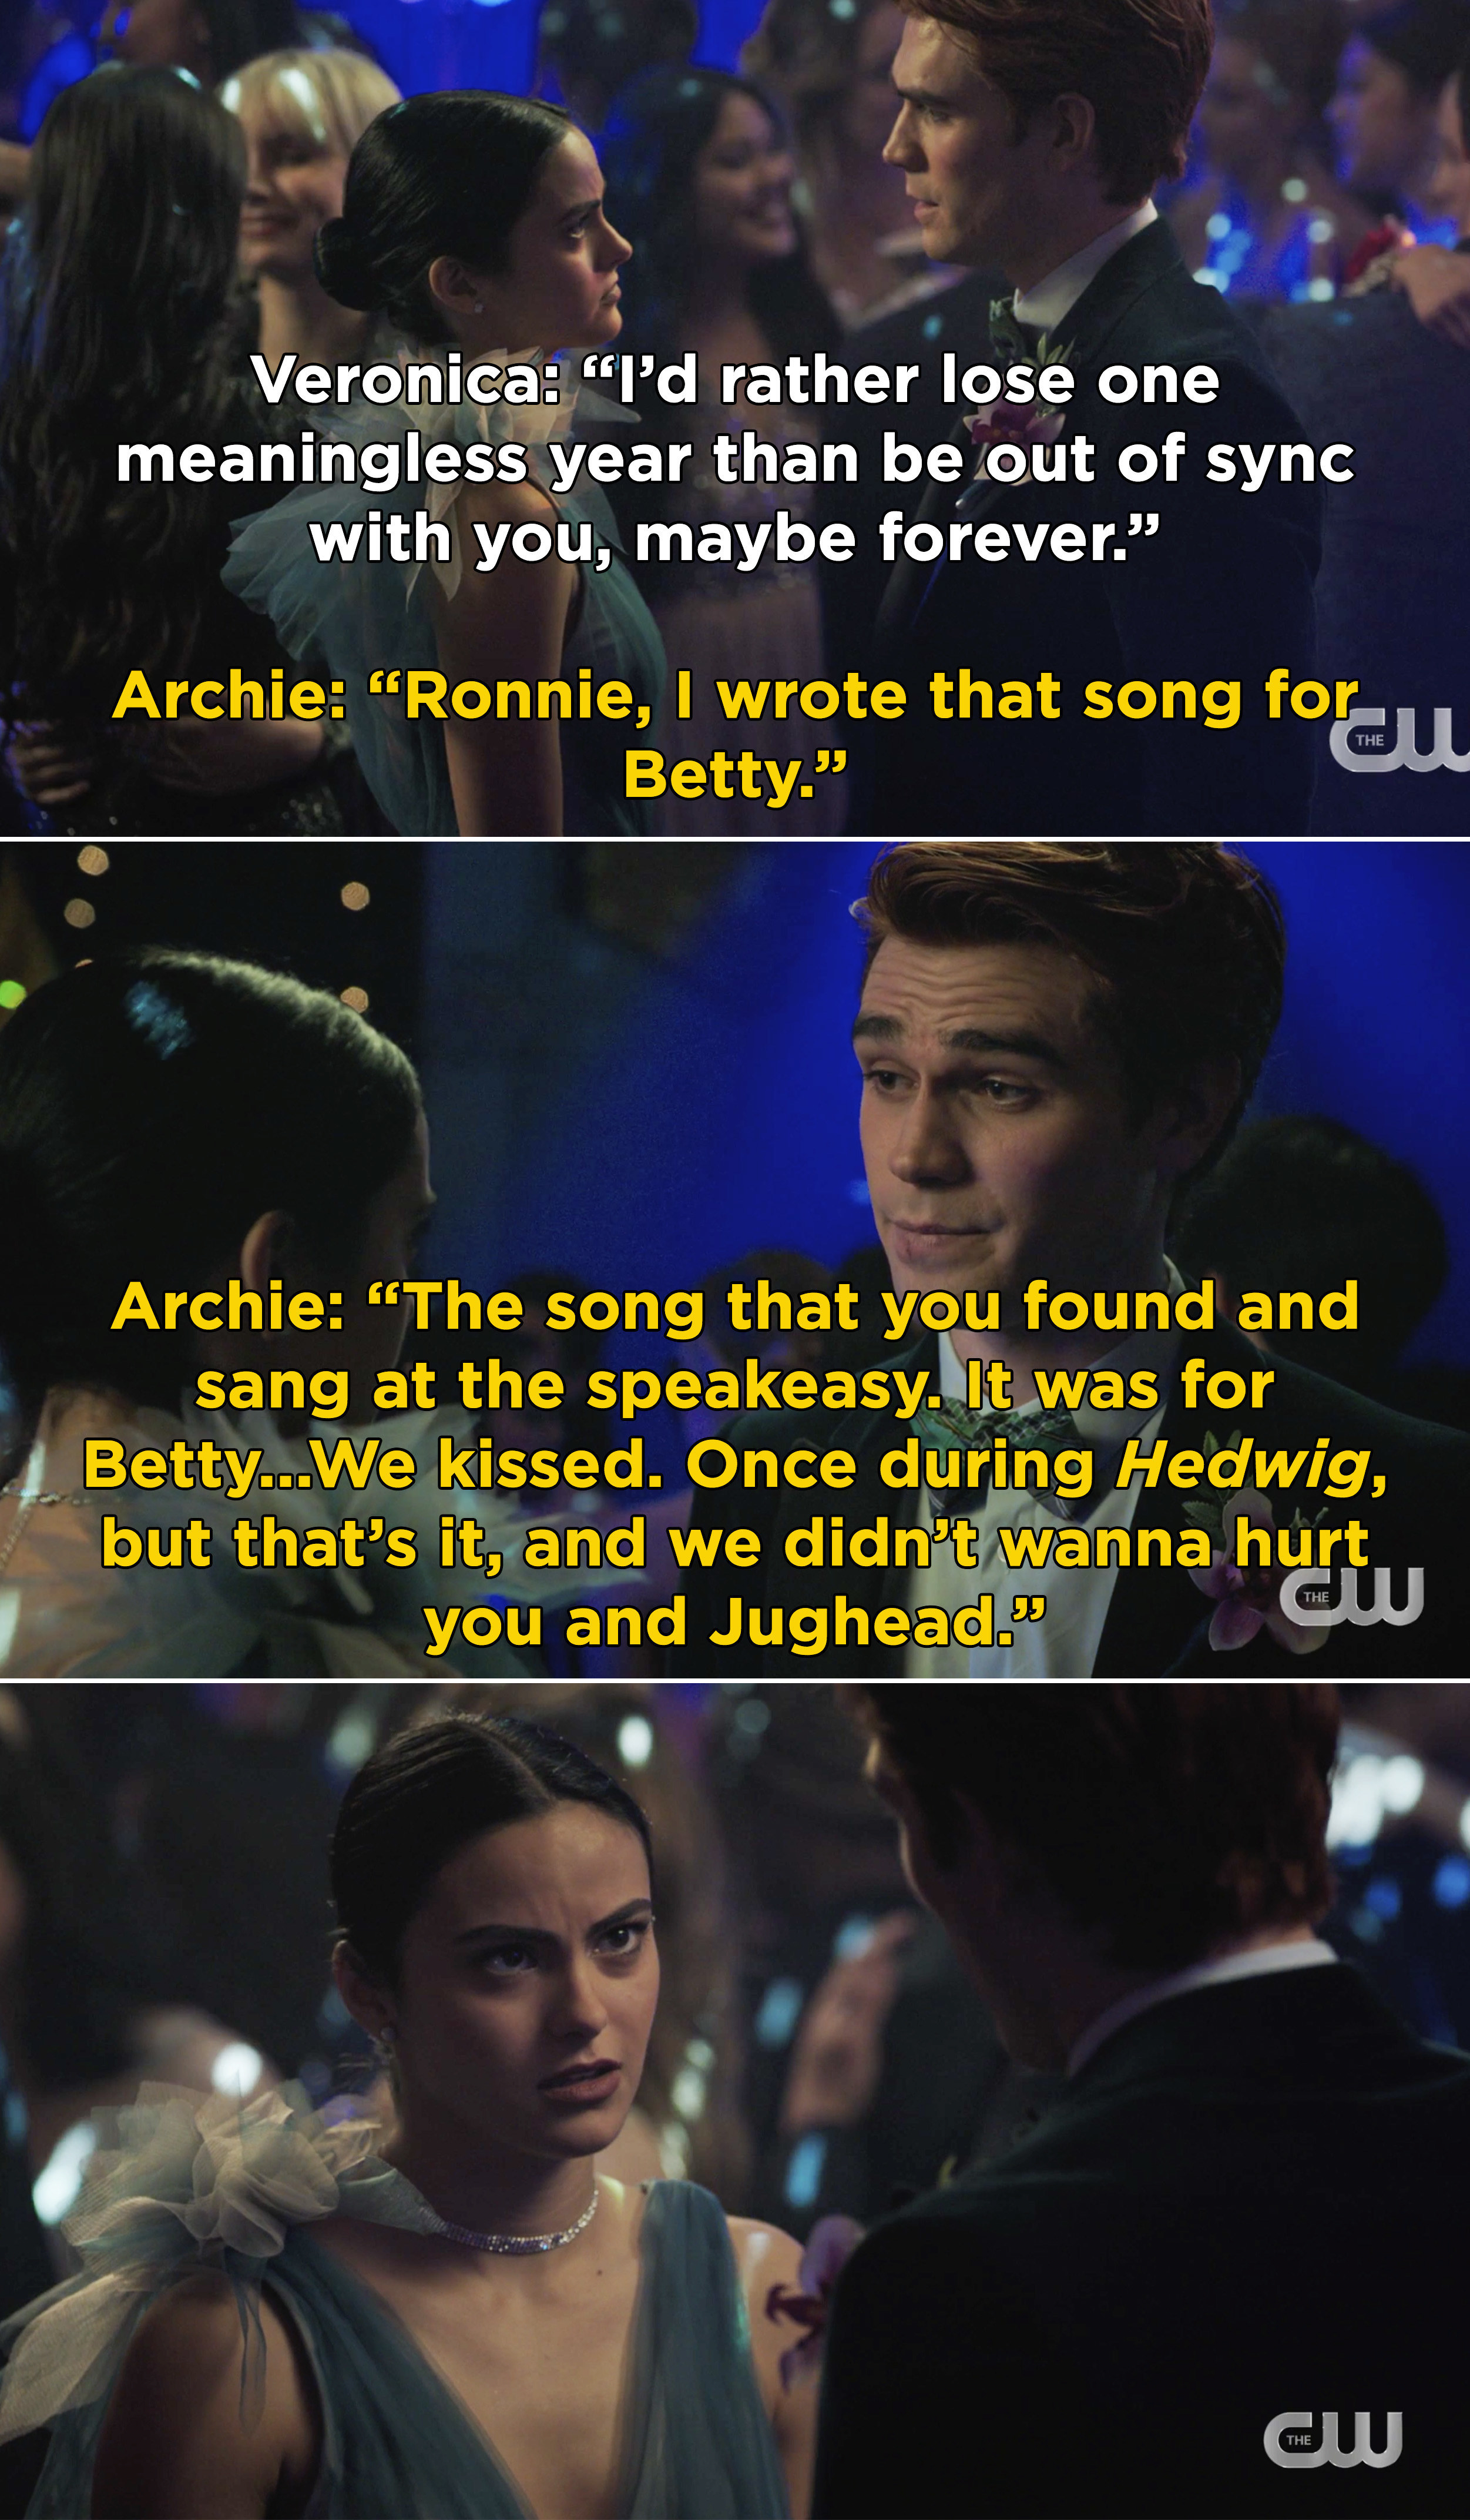 Archie tells Veronica that he wrote the song she sung at the speakeasy for Betty and also that they kissed once